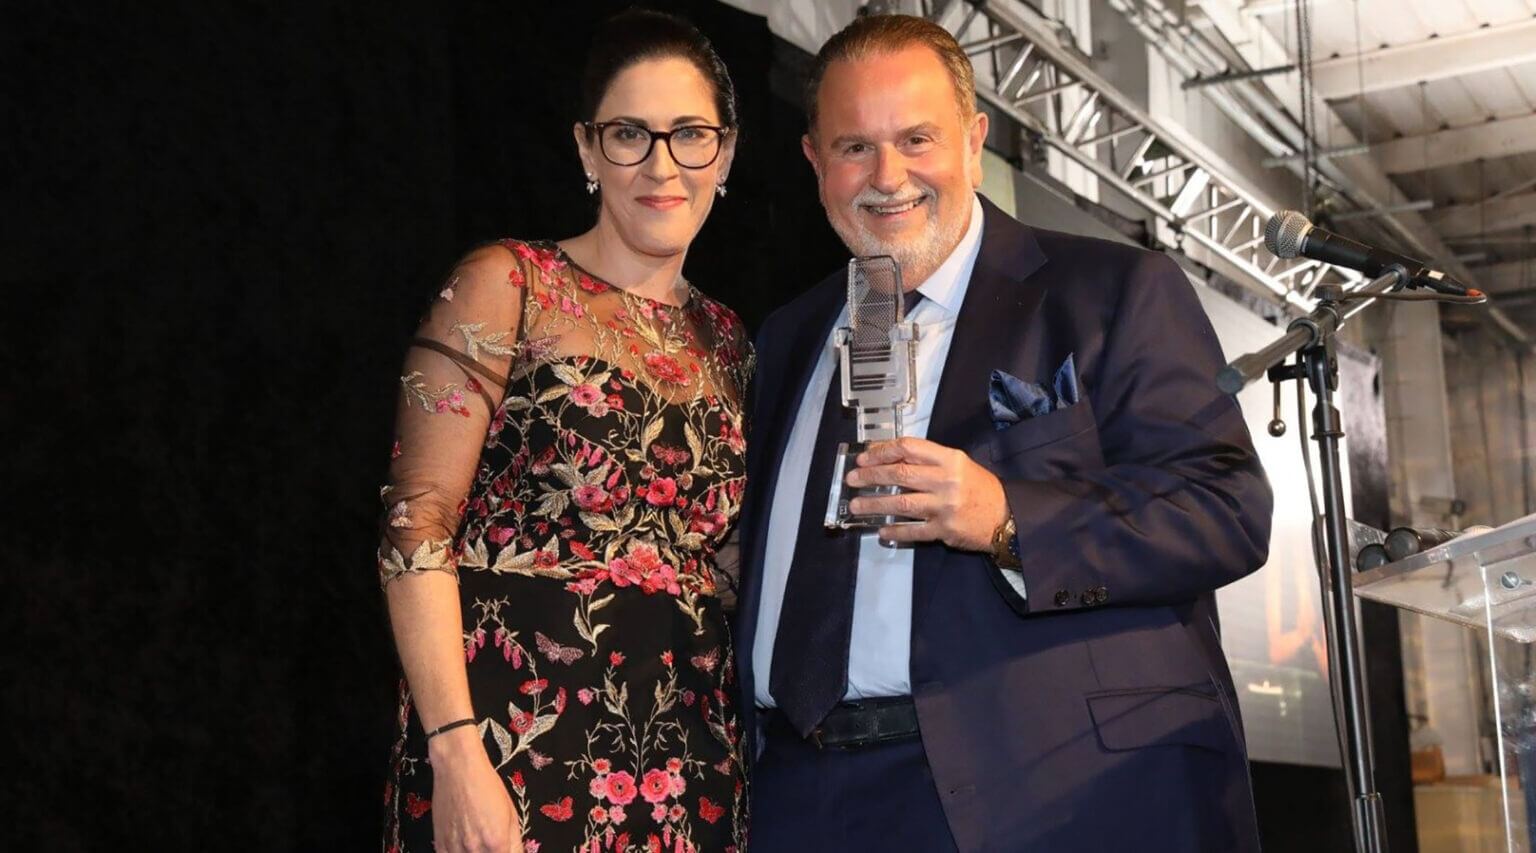 Fuente Latina CEO Leah Soibel shown with Raúl De Molina, co-host of the Univision Network, who has endorsed the Latin-Jewish Alliance.